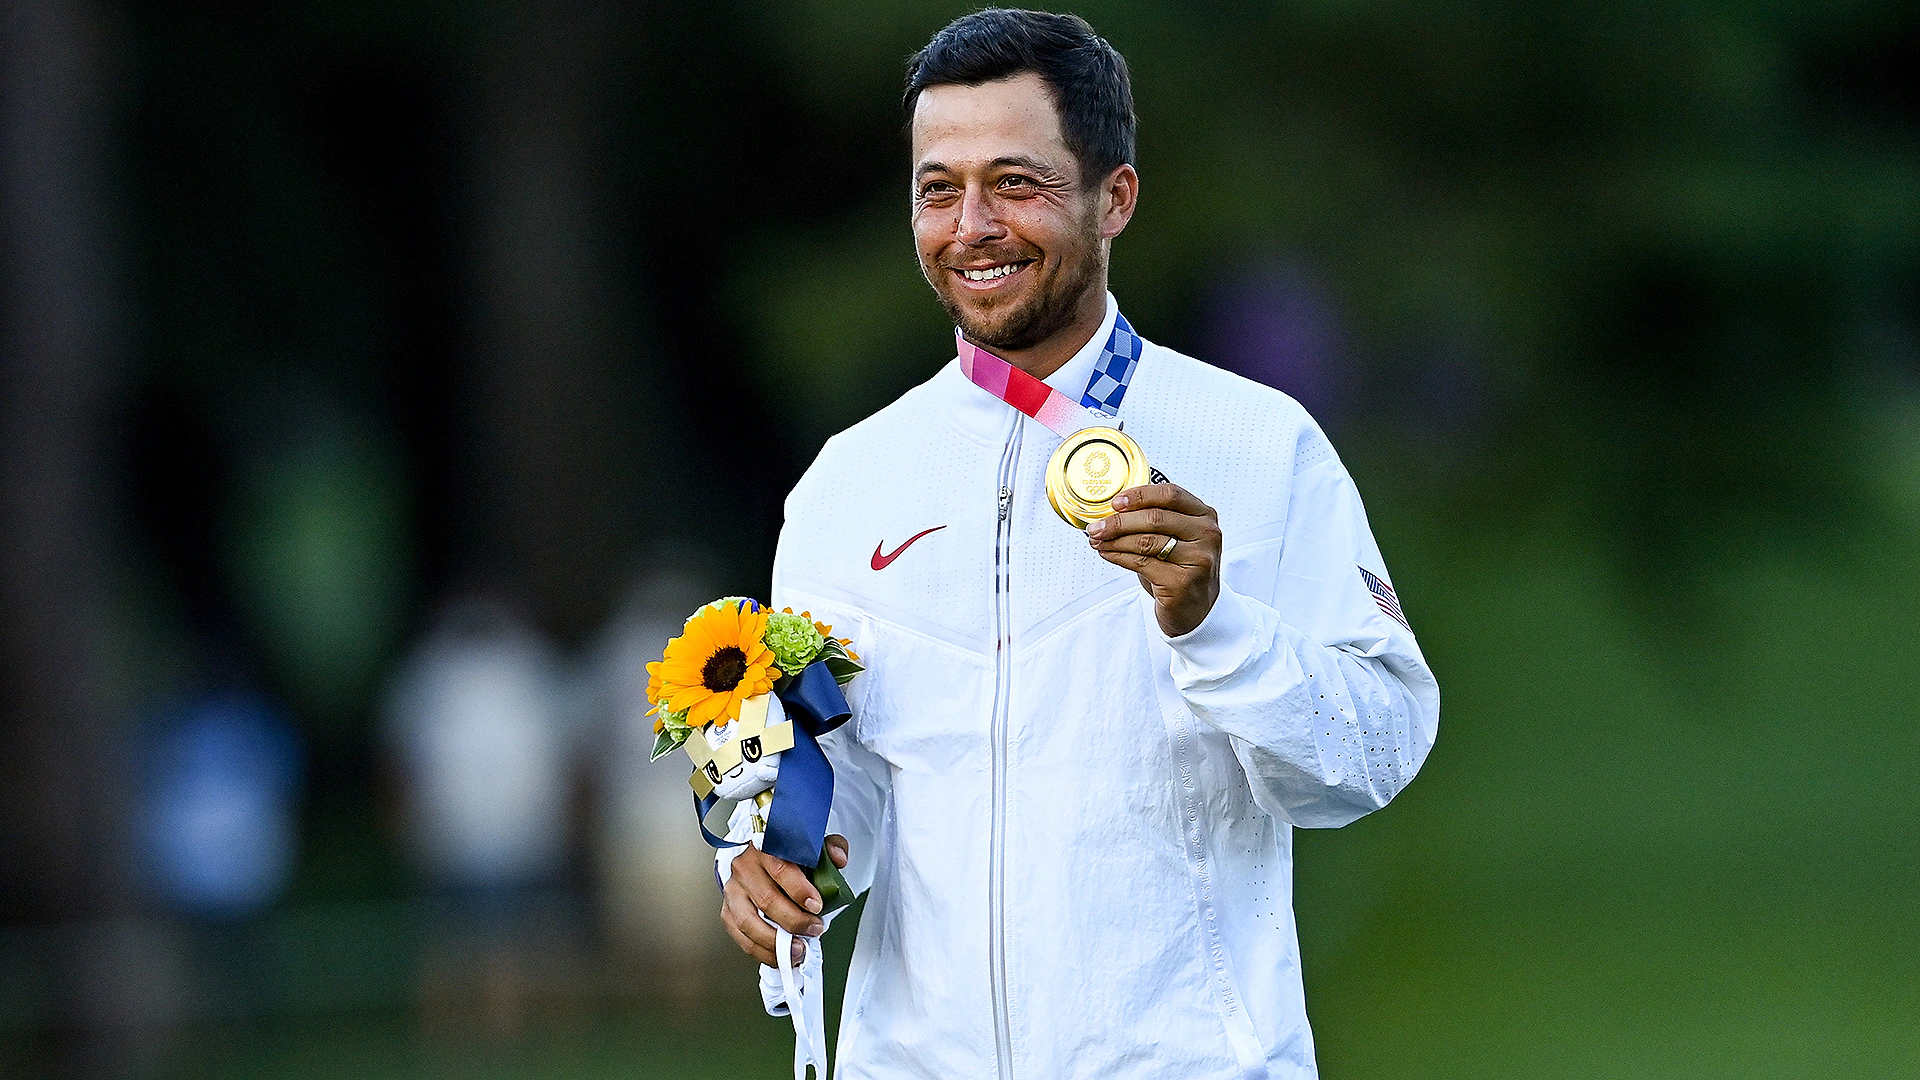 2020 Olympics: Xander Schauffele handles pressure to win gold – and it almost never happened